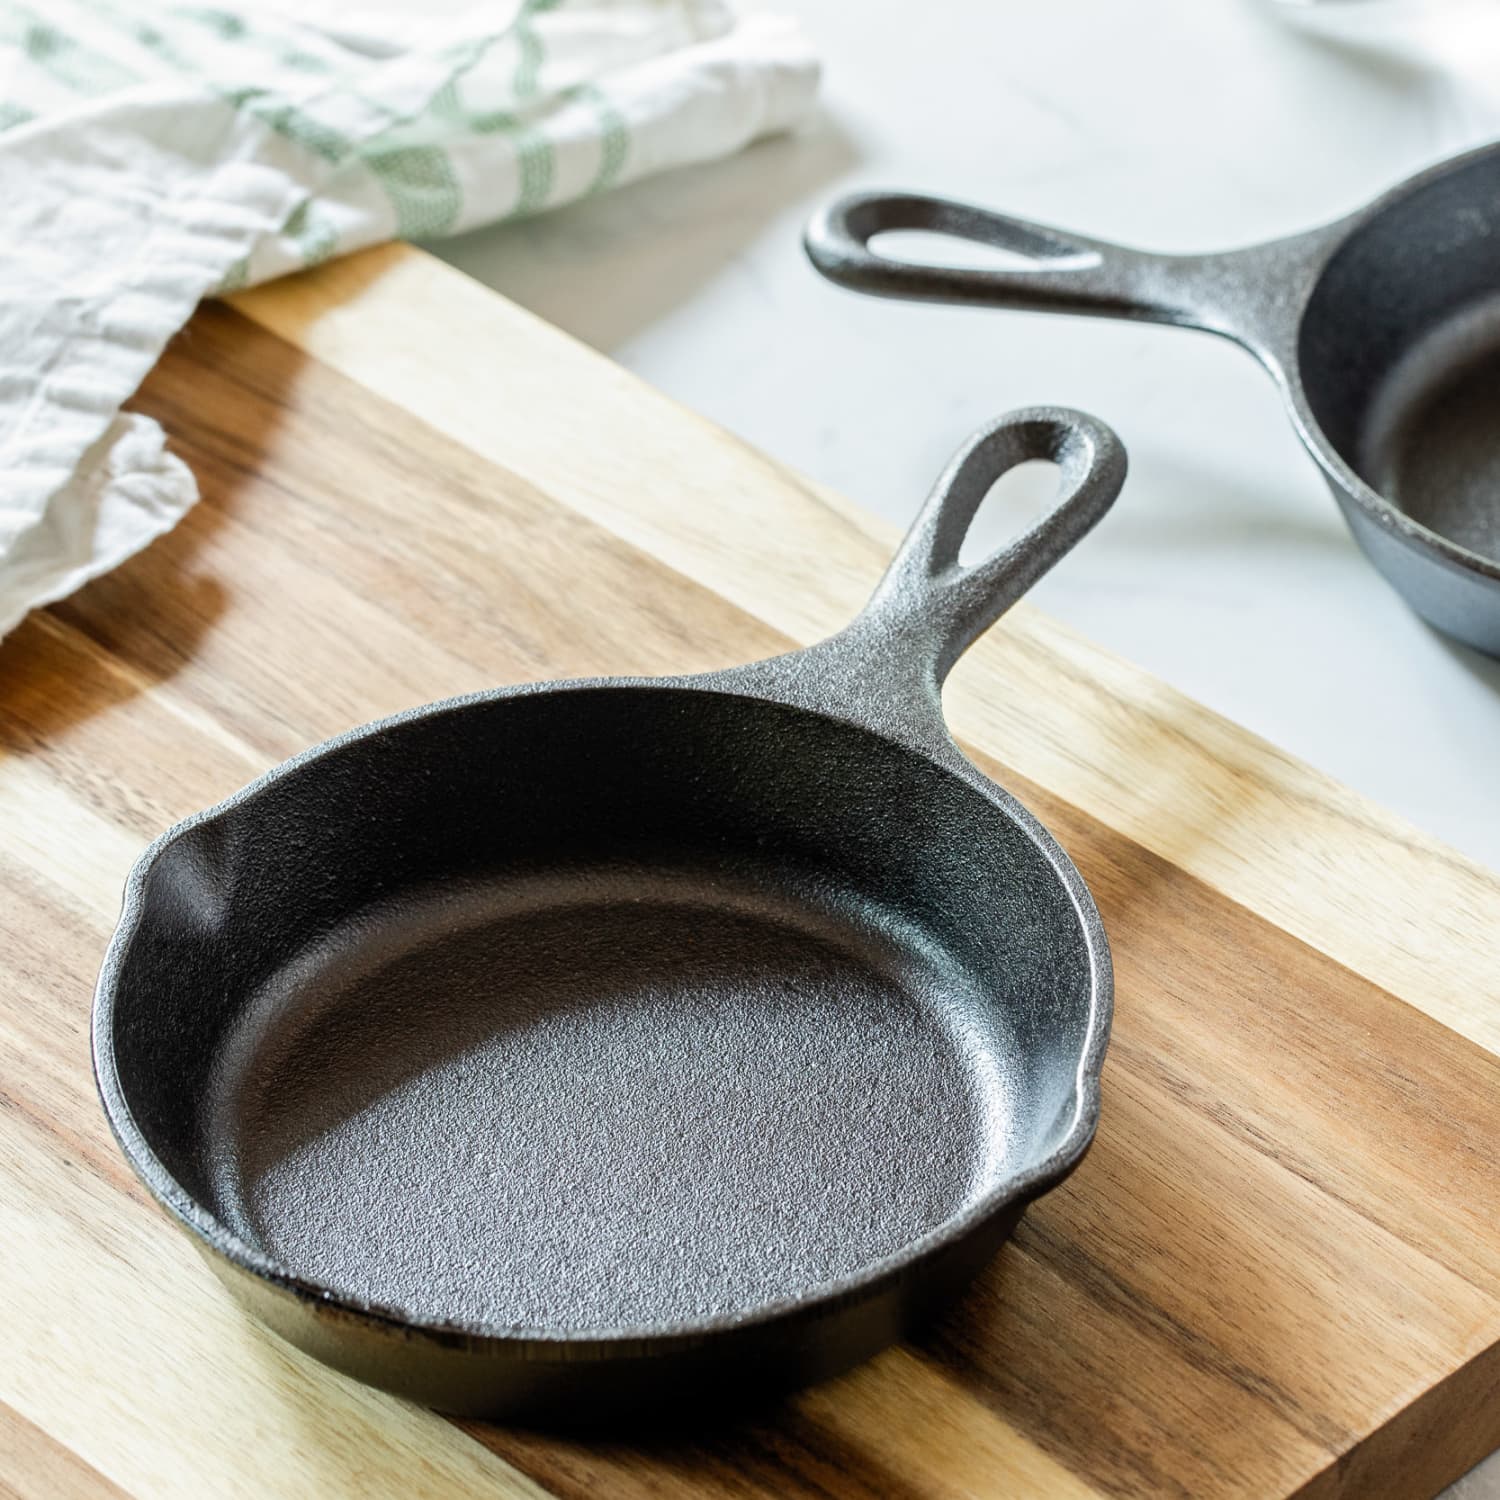 https://cdn.apartmenttherapy.info/image/upload/f_jpg,q_auto:eco,c_fill,g_auto,w_1500,ar_1:1/k%2FPhoto%2FLifestyle%2F2021-07-These-Mini-Cast-Iron-Skillets-Are-Made-for-Summer-y-Desserts%20%2Fkitchn-2021-mini-cast-iron-skillet-1